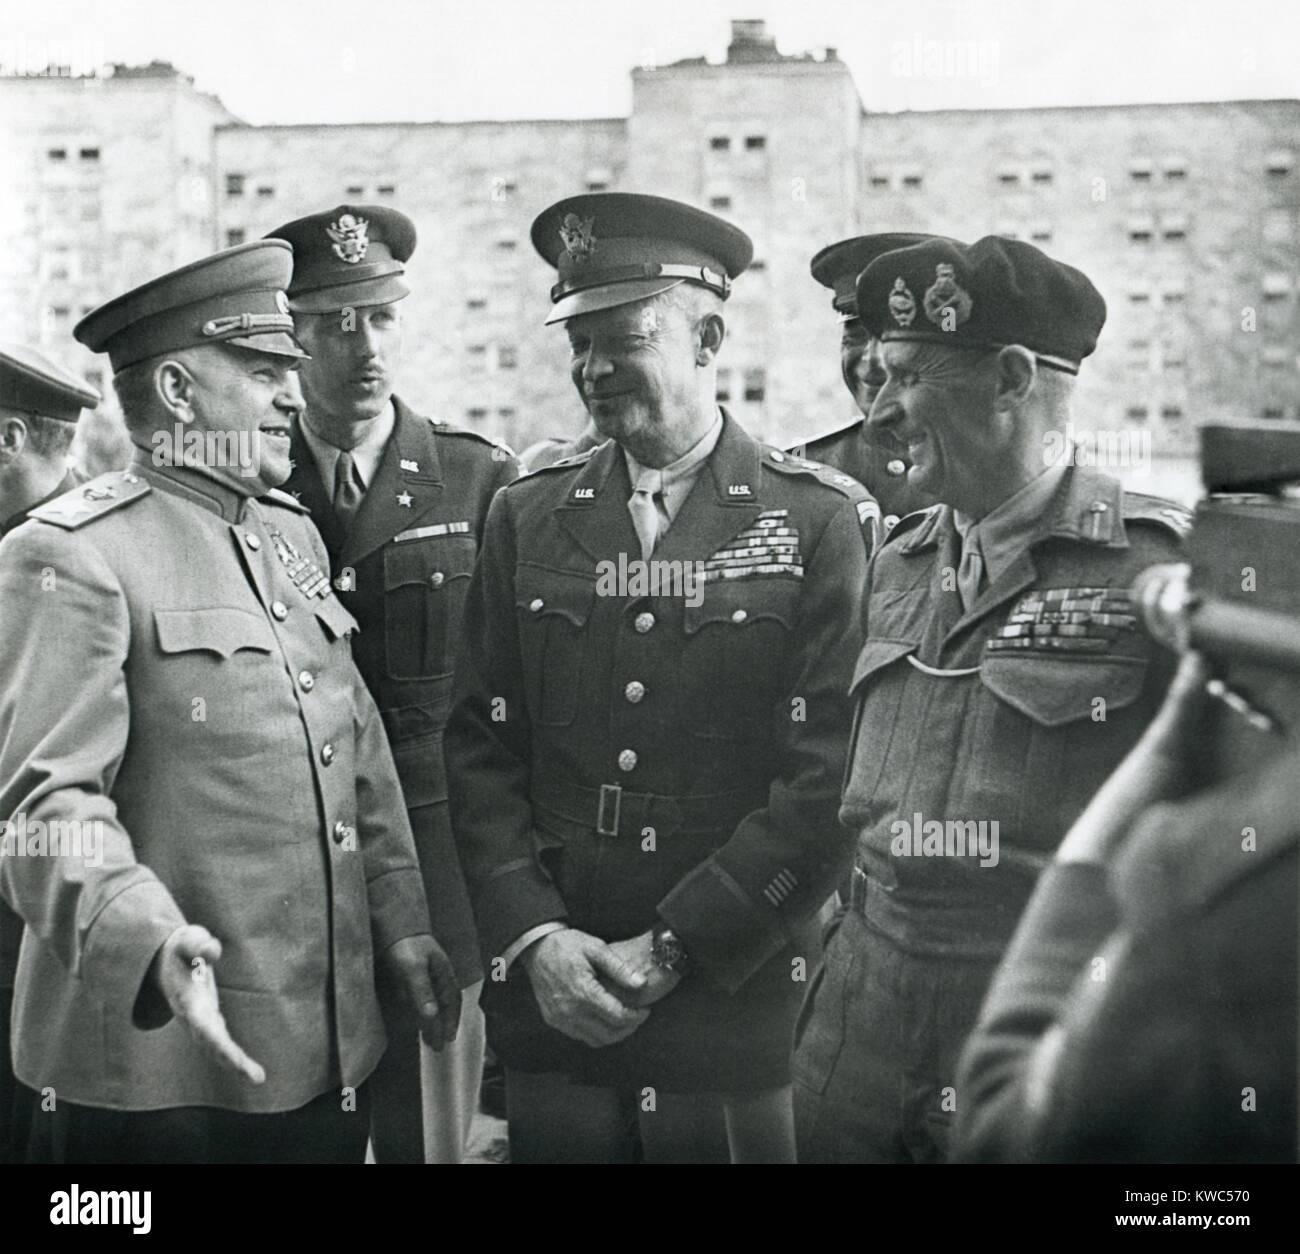 Victorious Allied Commanders, L-R: Georgi Zhukov, Dwight Eisenhower and Field Marshall Montgomery. June 5, 1945 in Berlin, Germany. World War 2 (BSLOC 2015 13 97) Stock Photo